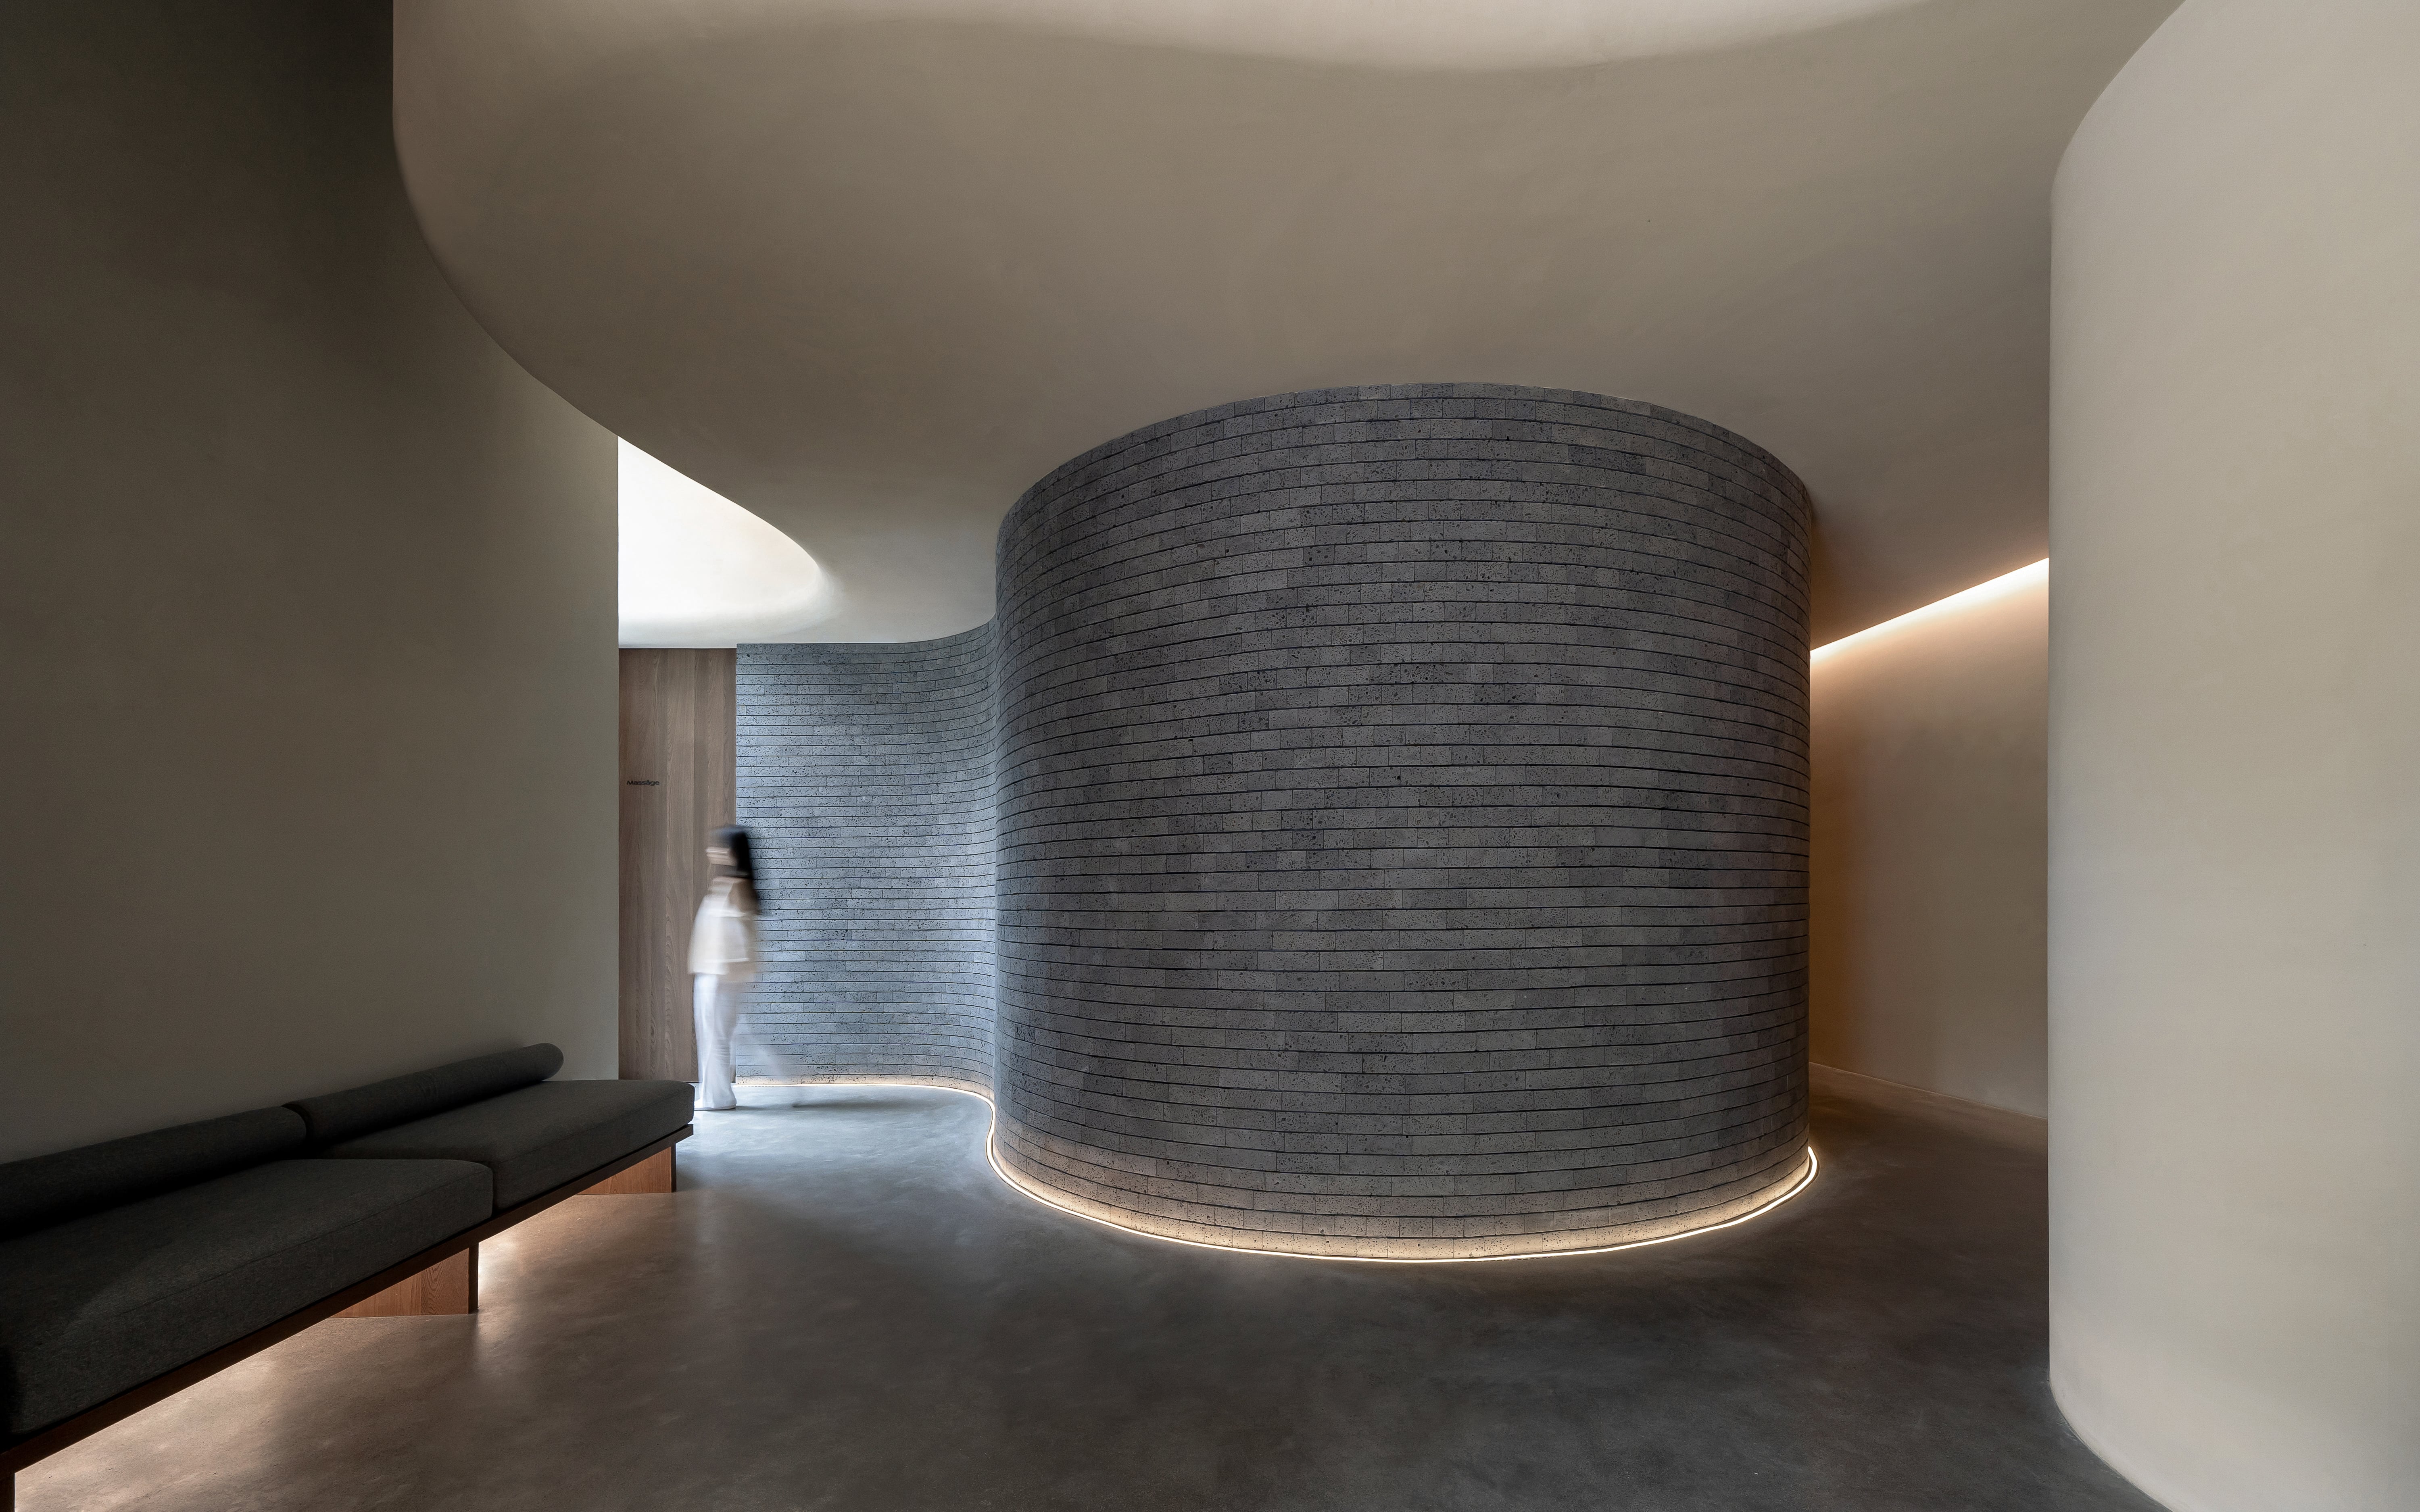 Smooth textures and curved walls dominate Shuran Wellness Space